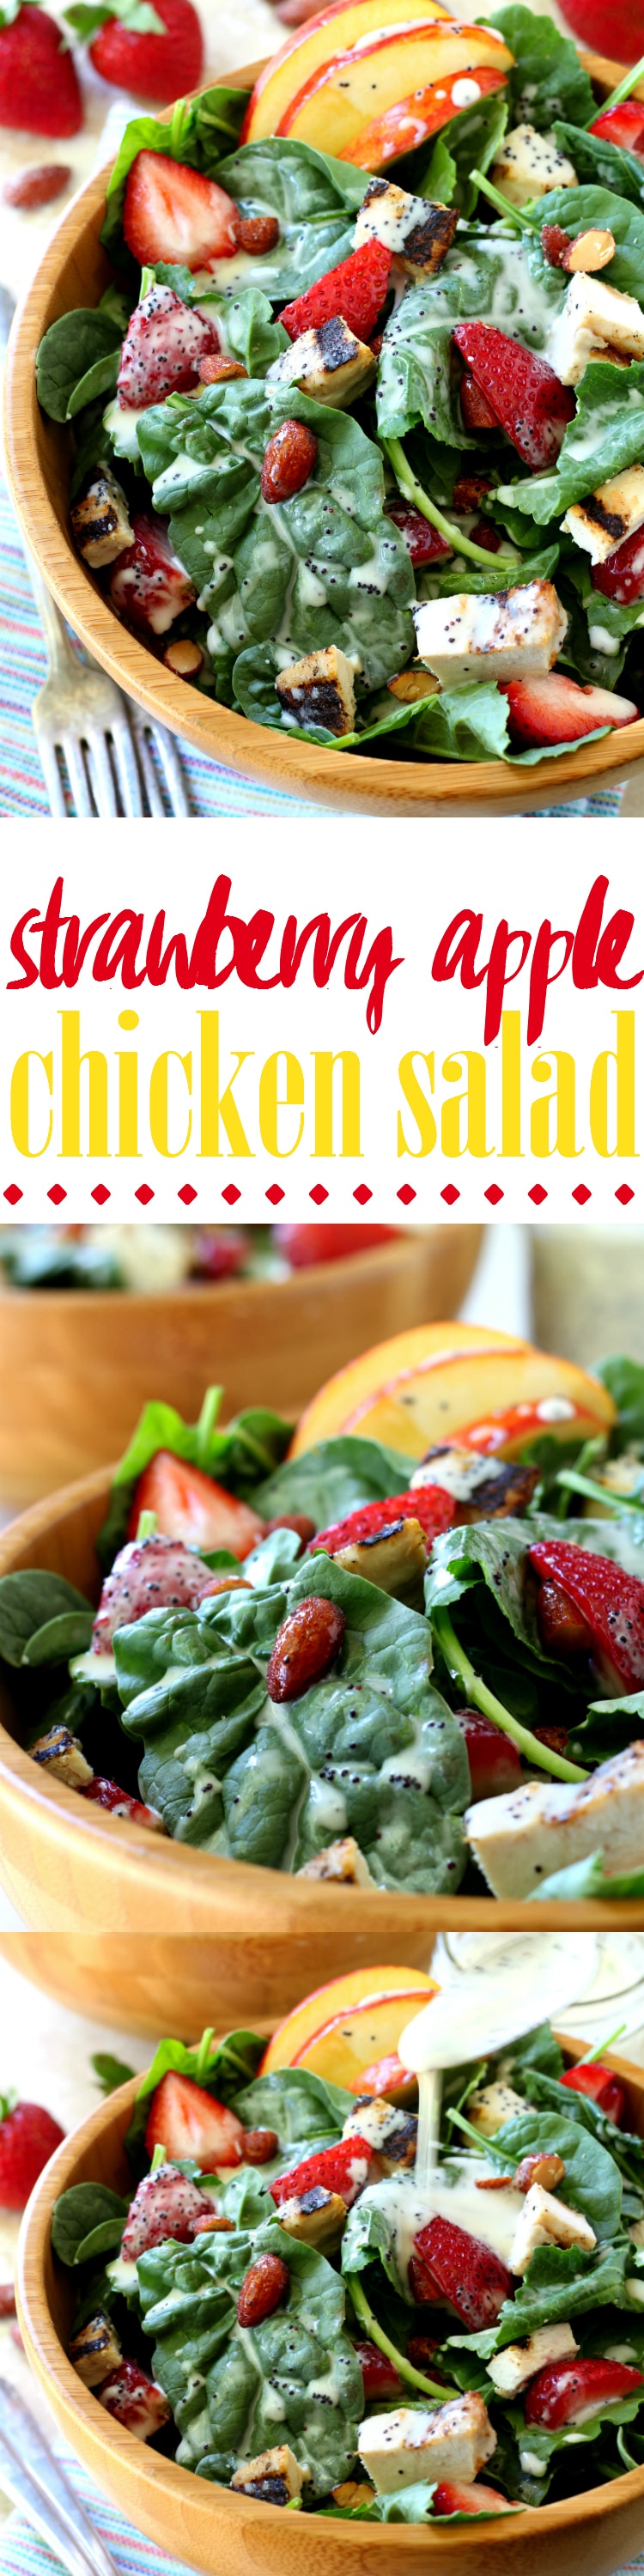 A quick and tasty Strawberry Apple Chicken Salad, filled with plump juicy strawberries, sweet apple slices, crunchy almonds and topped off with the most wonderful poppy seed dressing you've ever tasted!